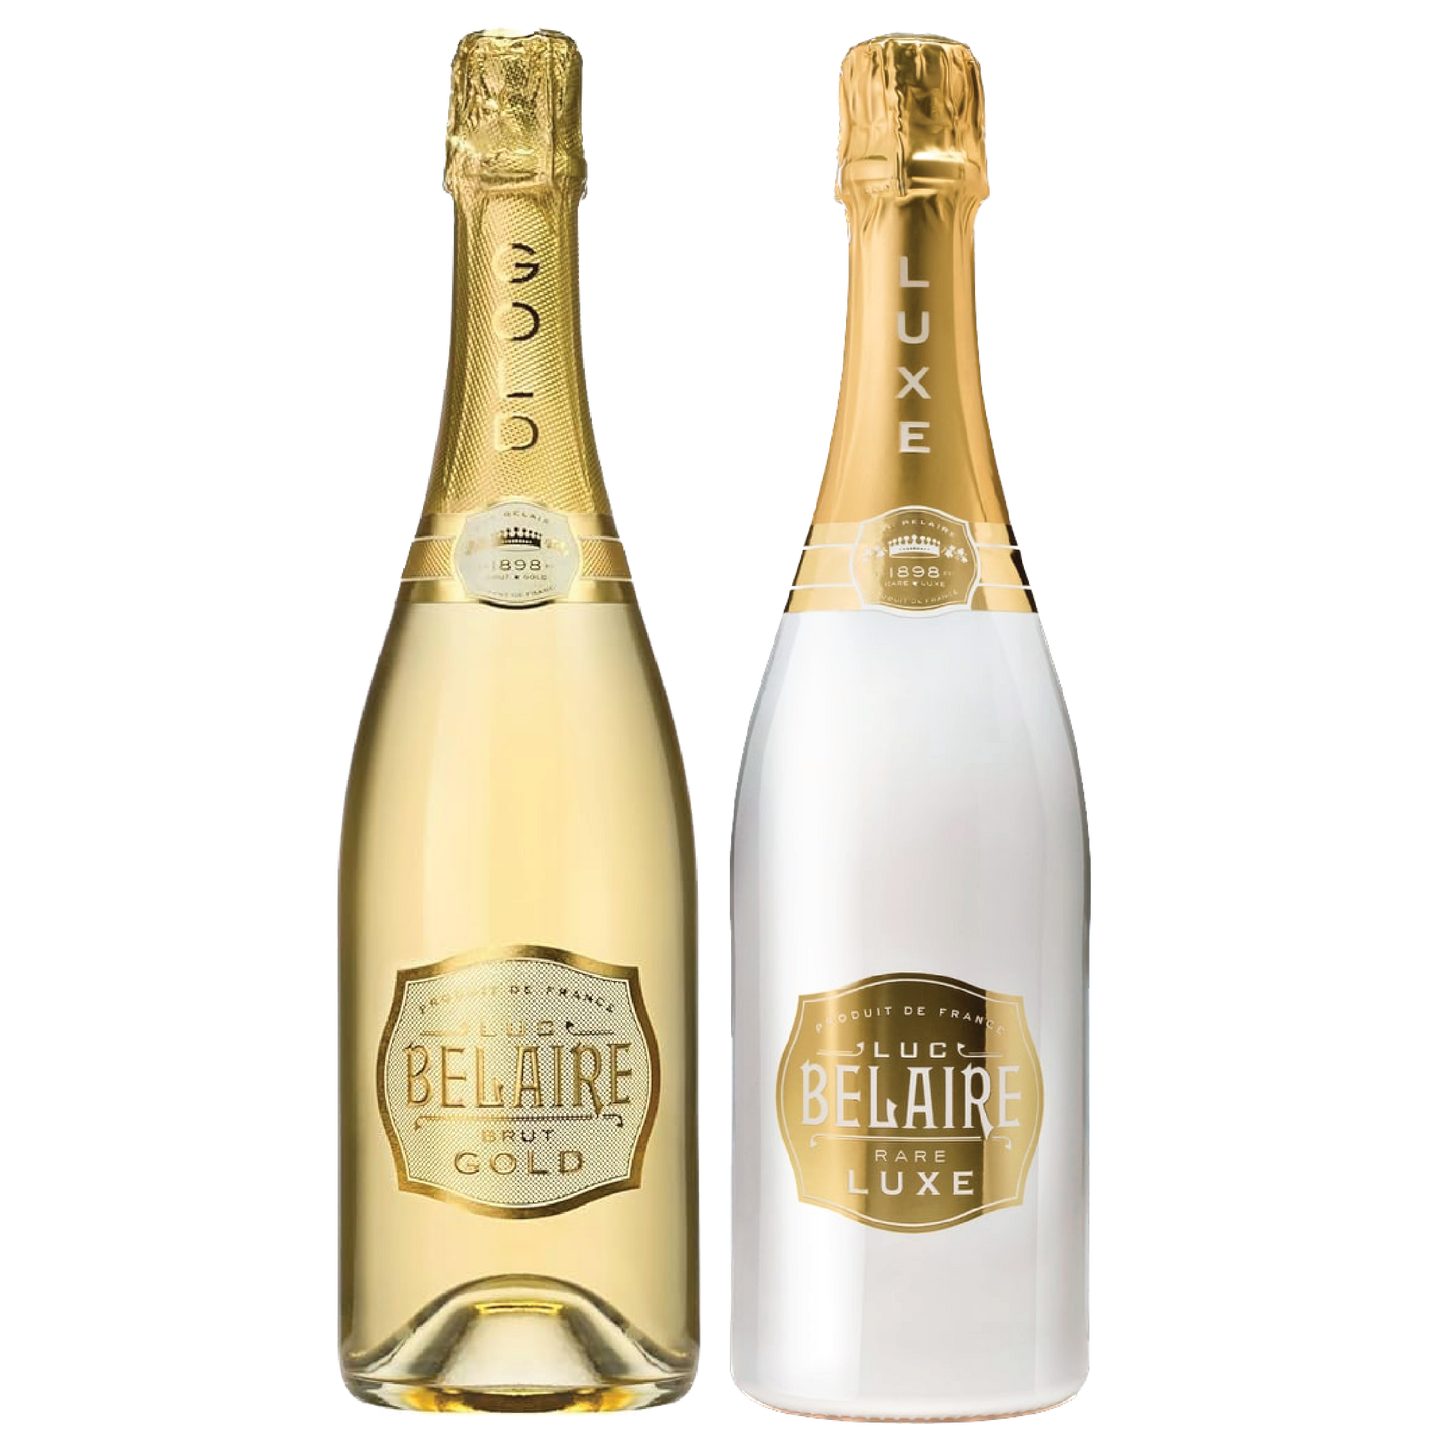 Luc Belaire Gold & Luxe Package